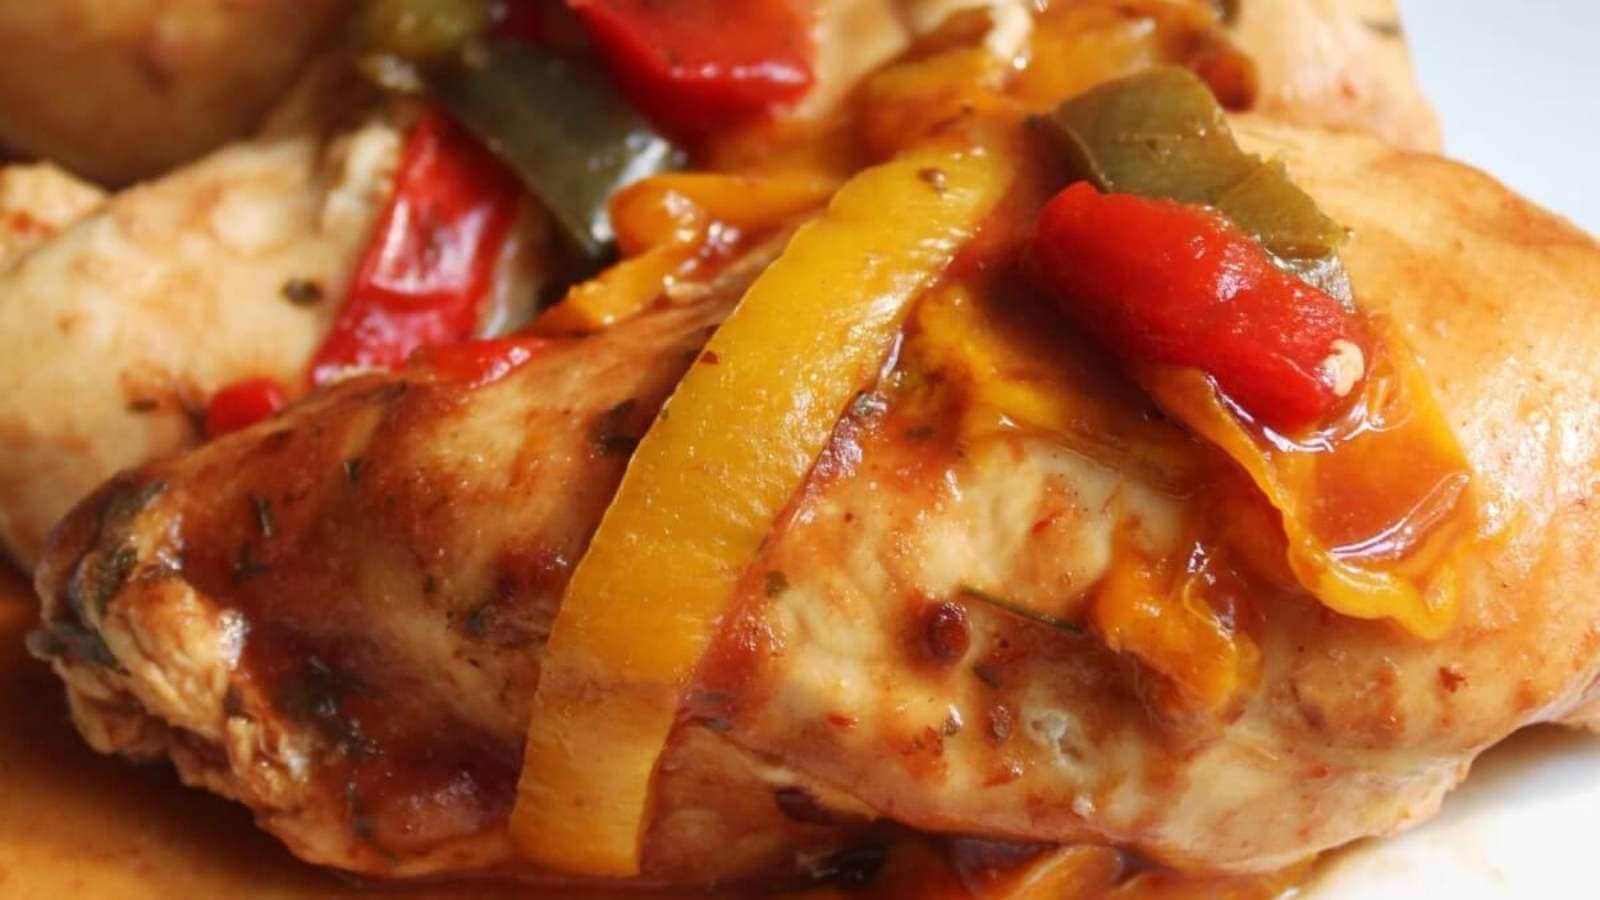 Chicken with peppers and peppers on a plate.